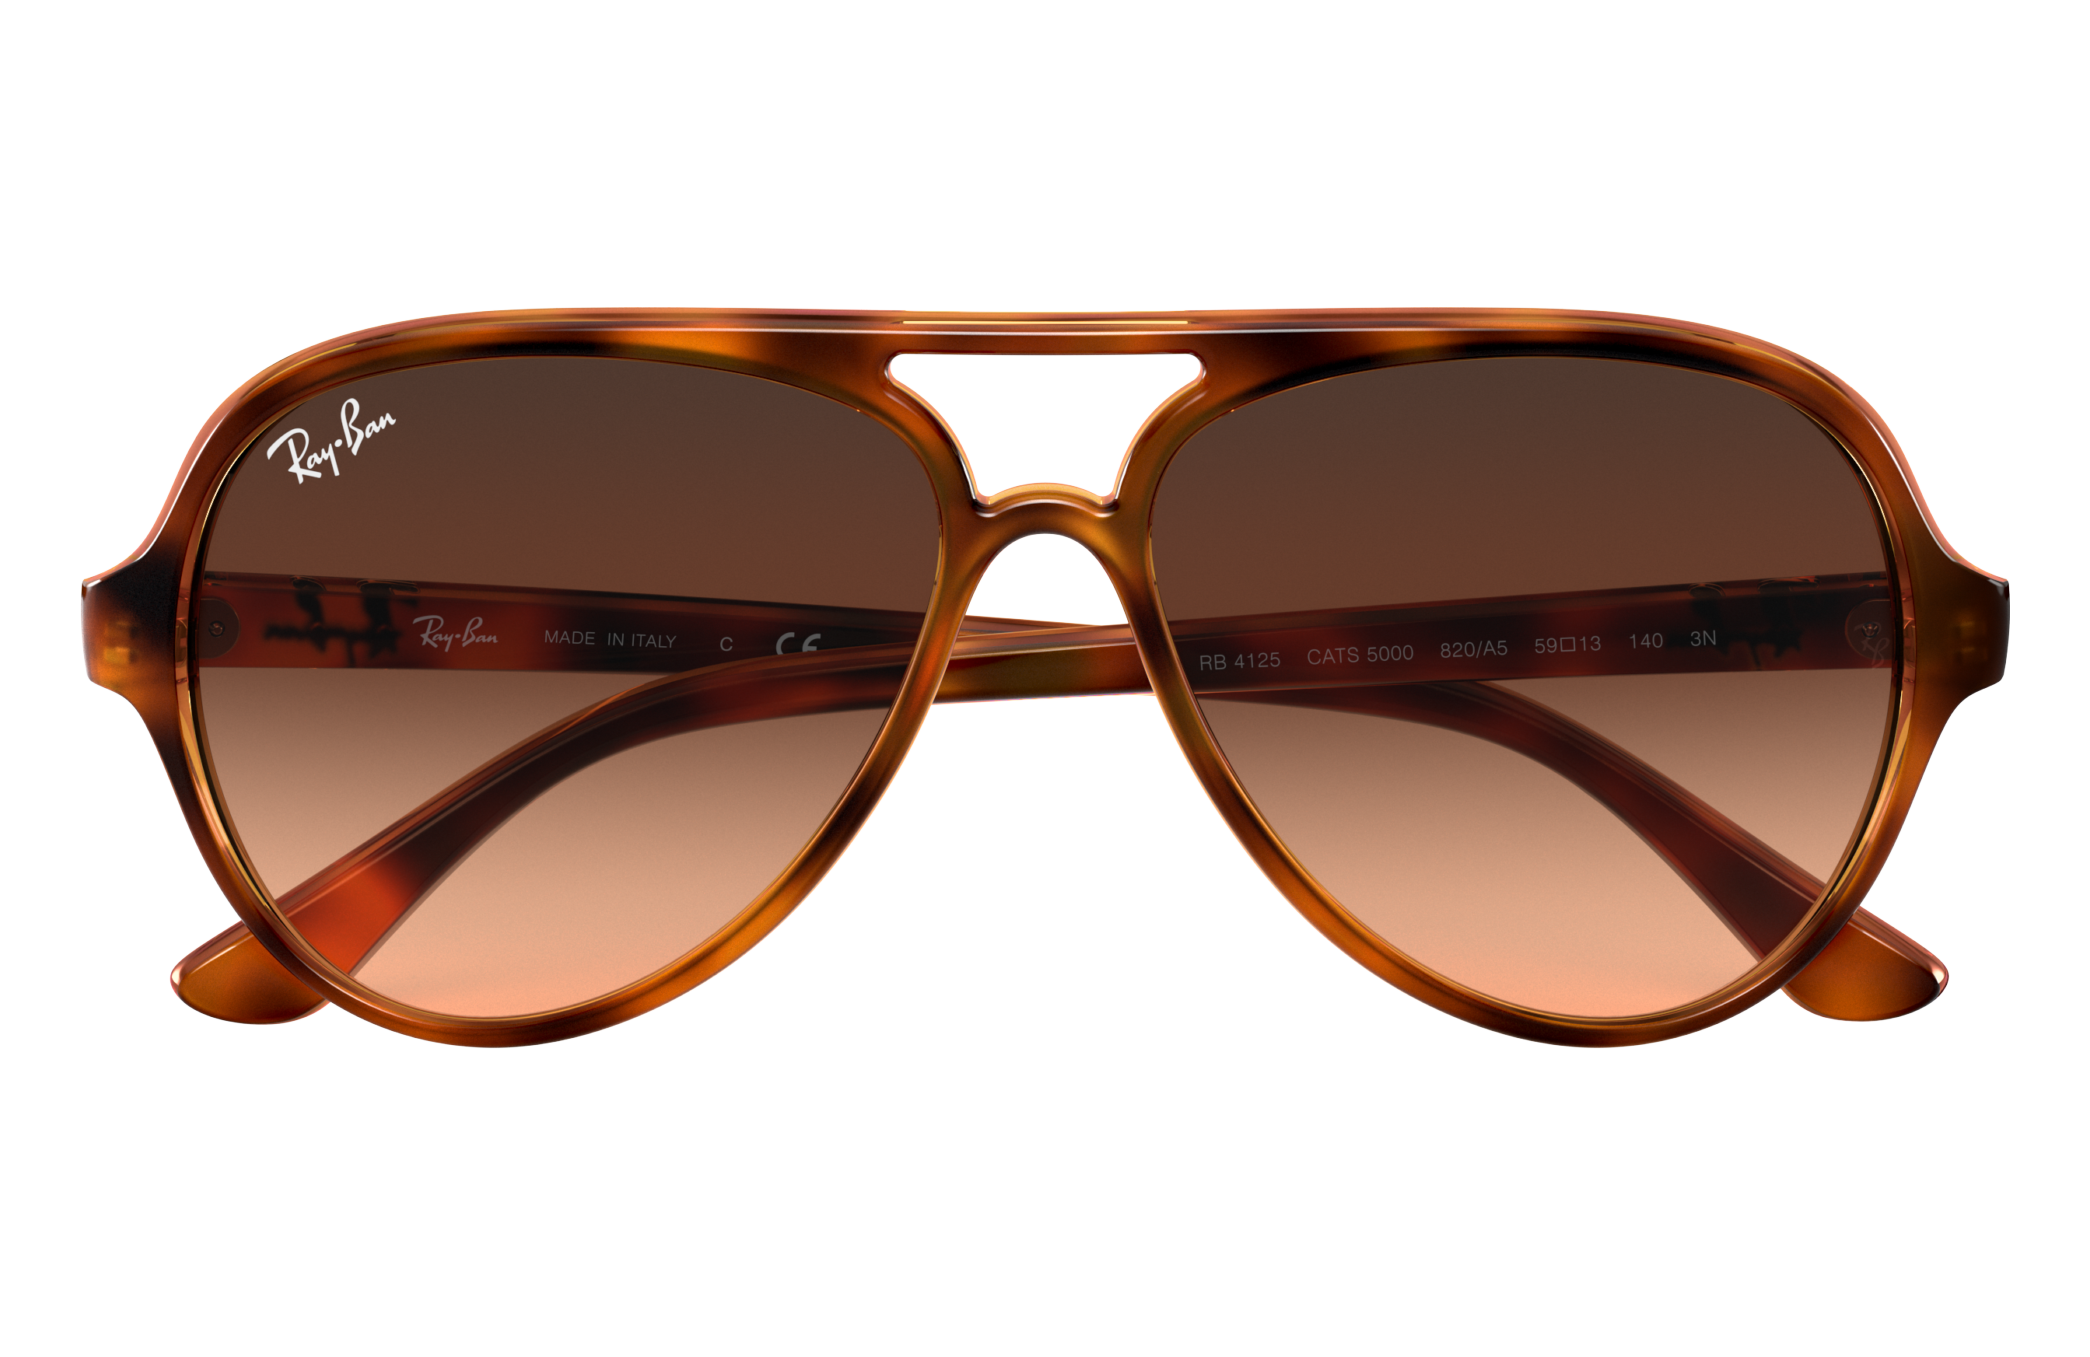 ray ban rb4125 cats sunglasses brown frame brown gradient lens